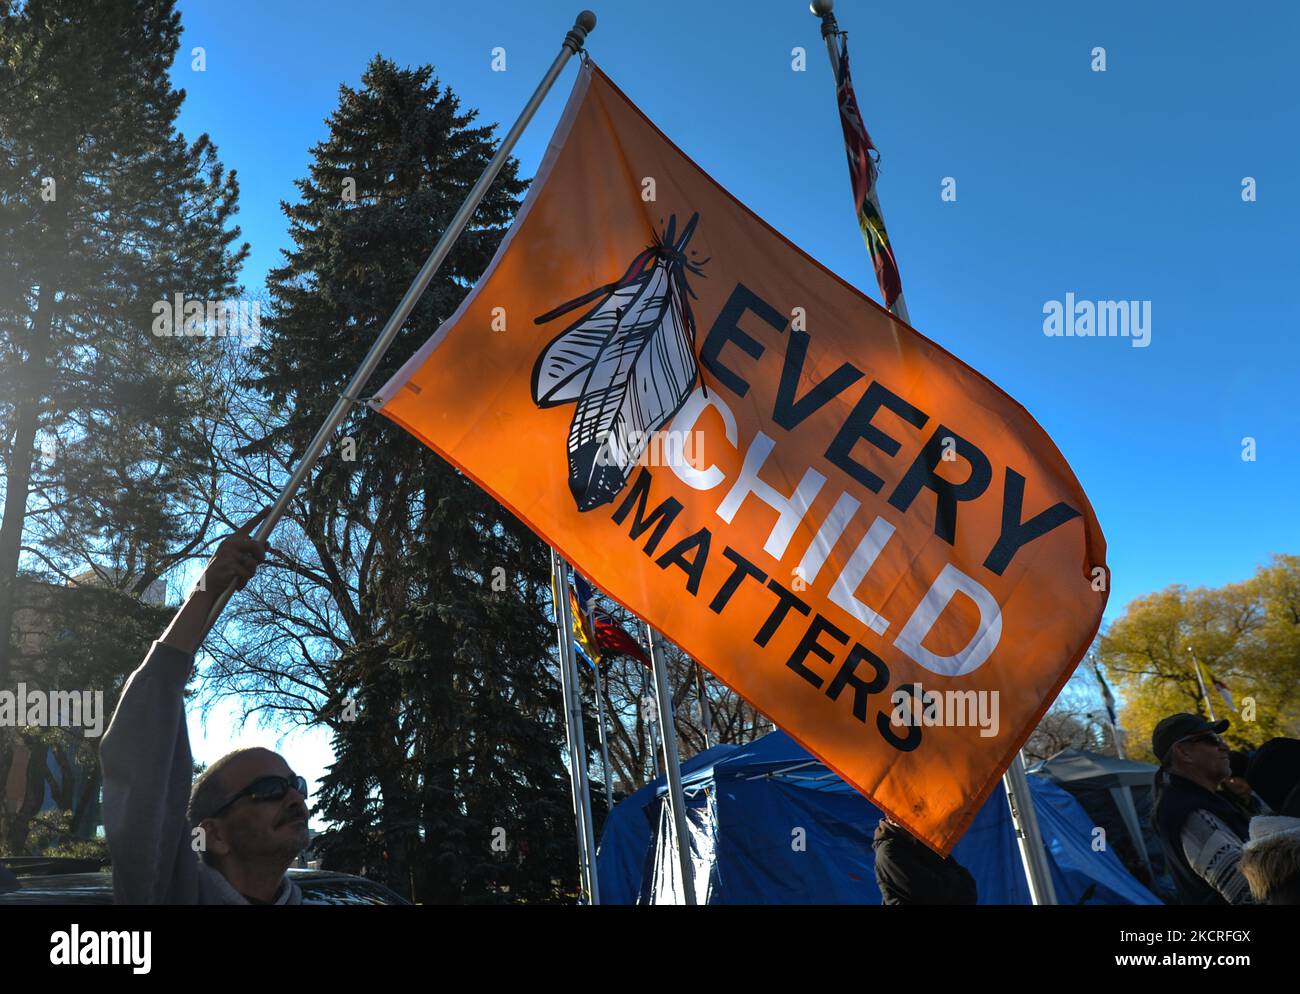 A man holds a flag with inscription 'Every Child Matters'. Hundreds of Albertans gathered during 'Standing Together Against Mandatory Vaccines' protest against forced vaccine mandates at the Alberta Legislative Grounds, joining a 'sit-in' camp by members of the First Nations and their supporters who protest since the beginnin of October, to raise awareness of issues facing First Nations communities in Canada. On Sunday, 24 August 2021, in Alberta Legislature Grounds, Edmonton, Alberta, Canada. (Photo by Artur Widak/NurPhoto) Stock Photo